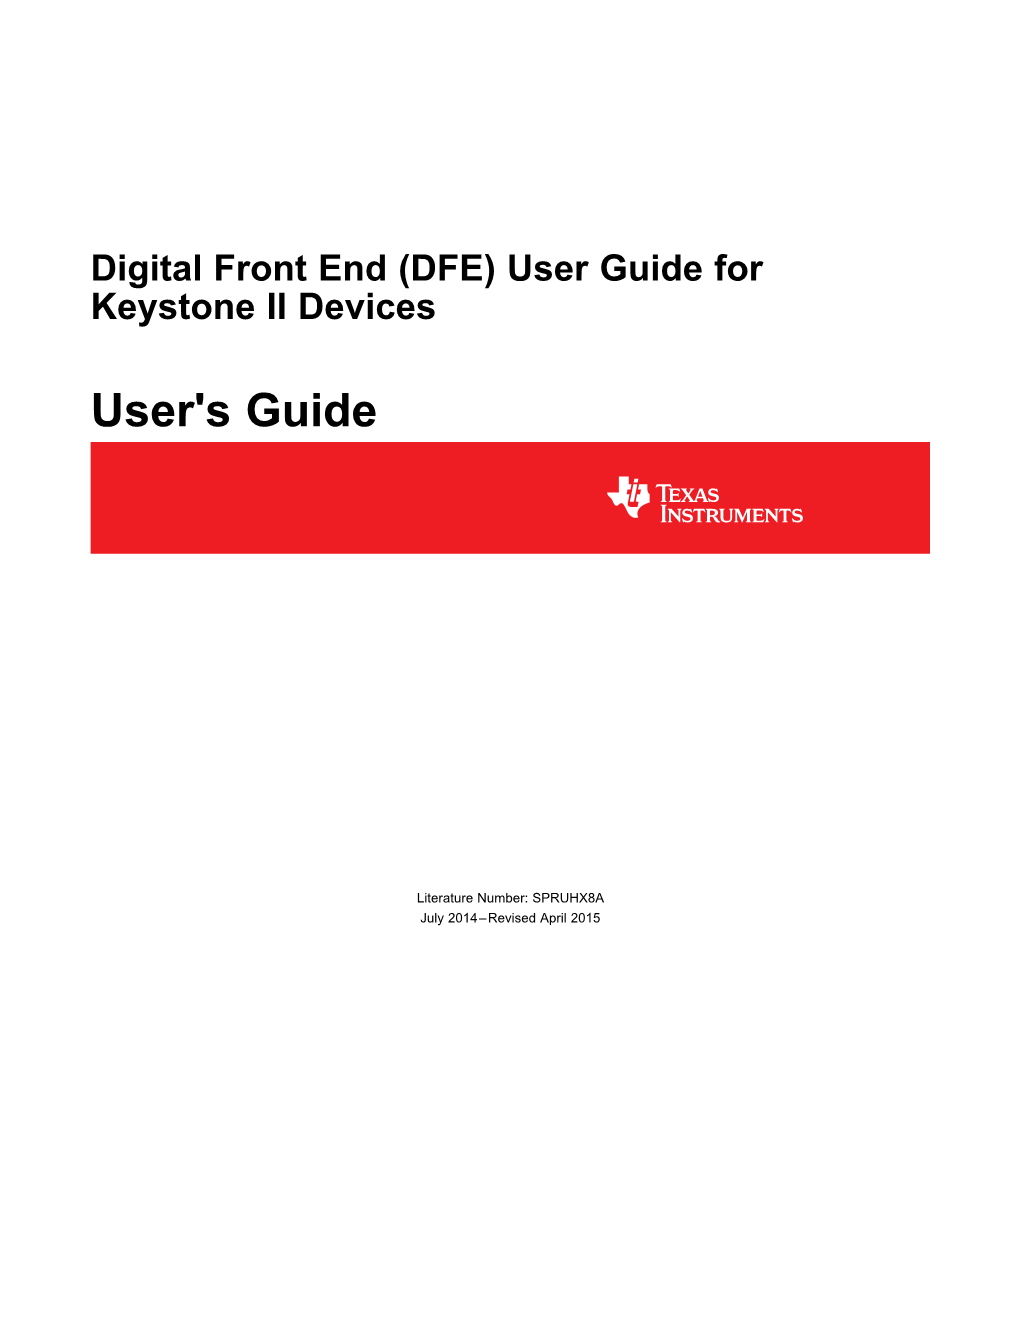 Digital Front End (DFE) User Guide for Keystone II Devices